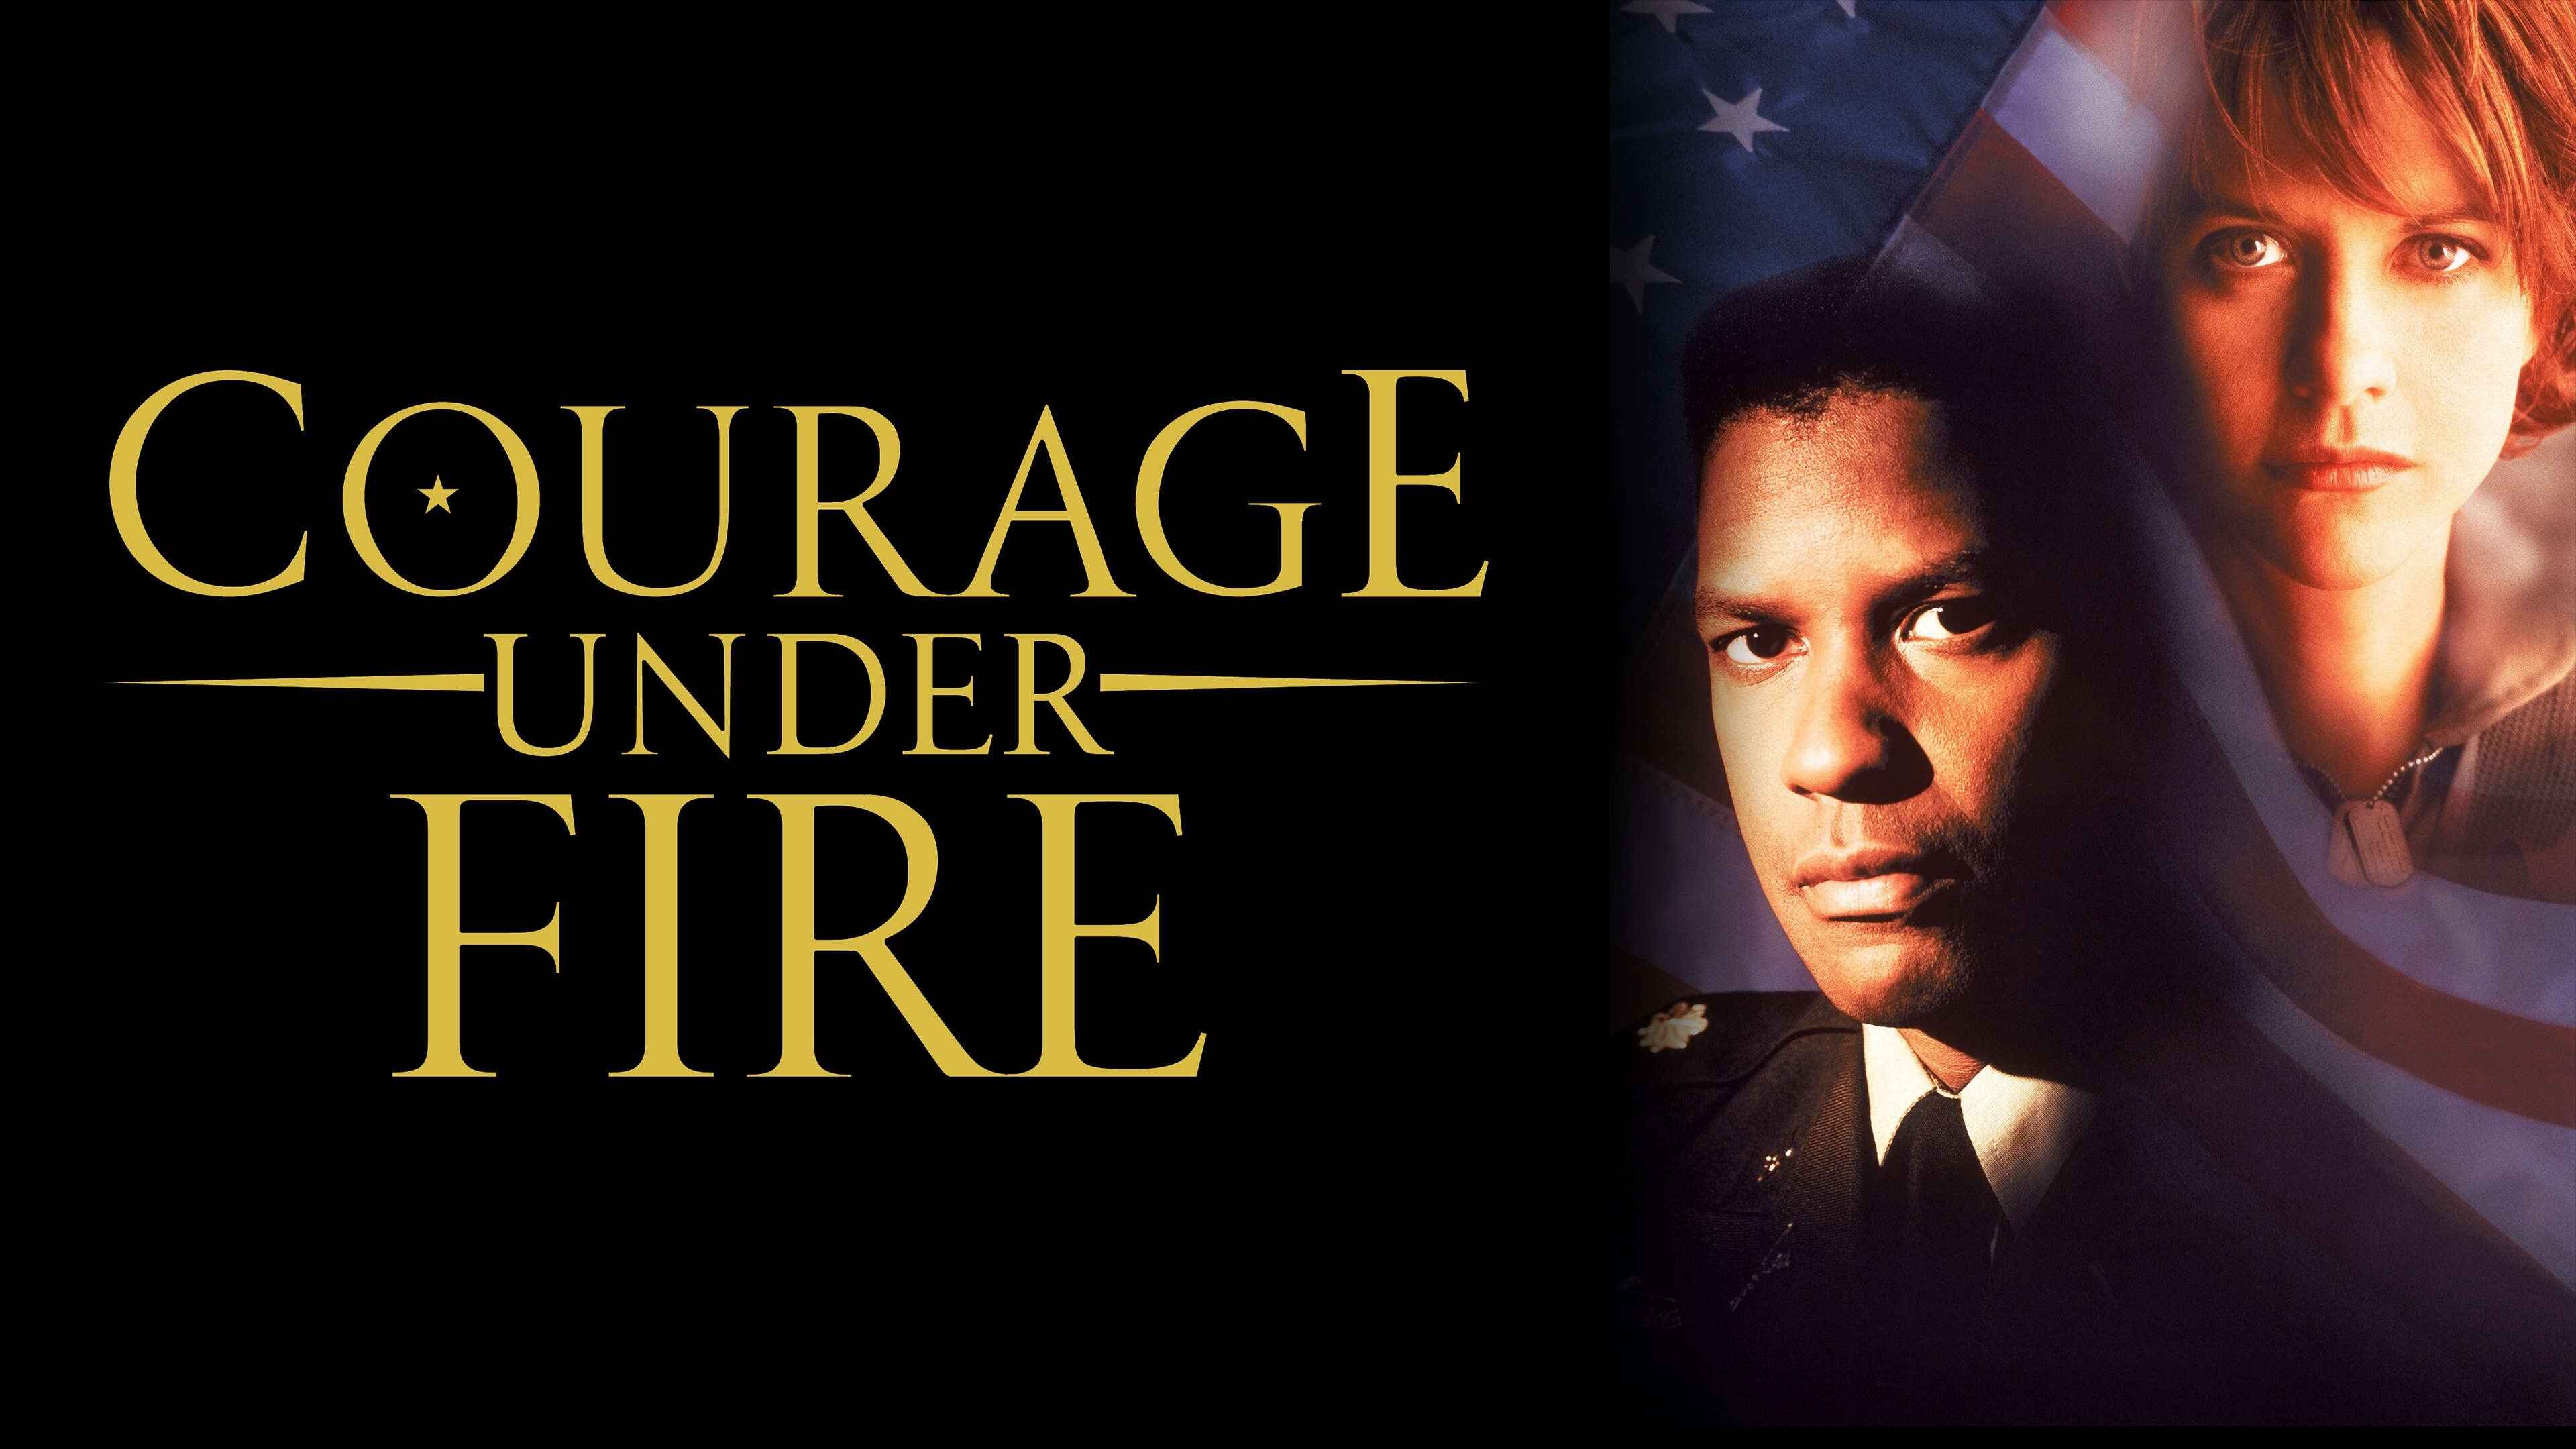 44-facts-about-the-movie-courage-under-fire